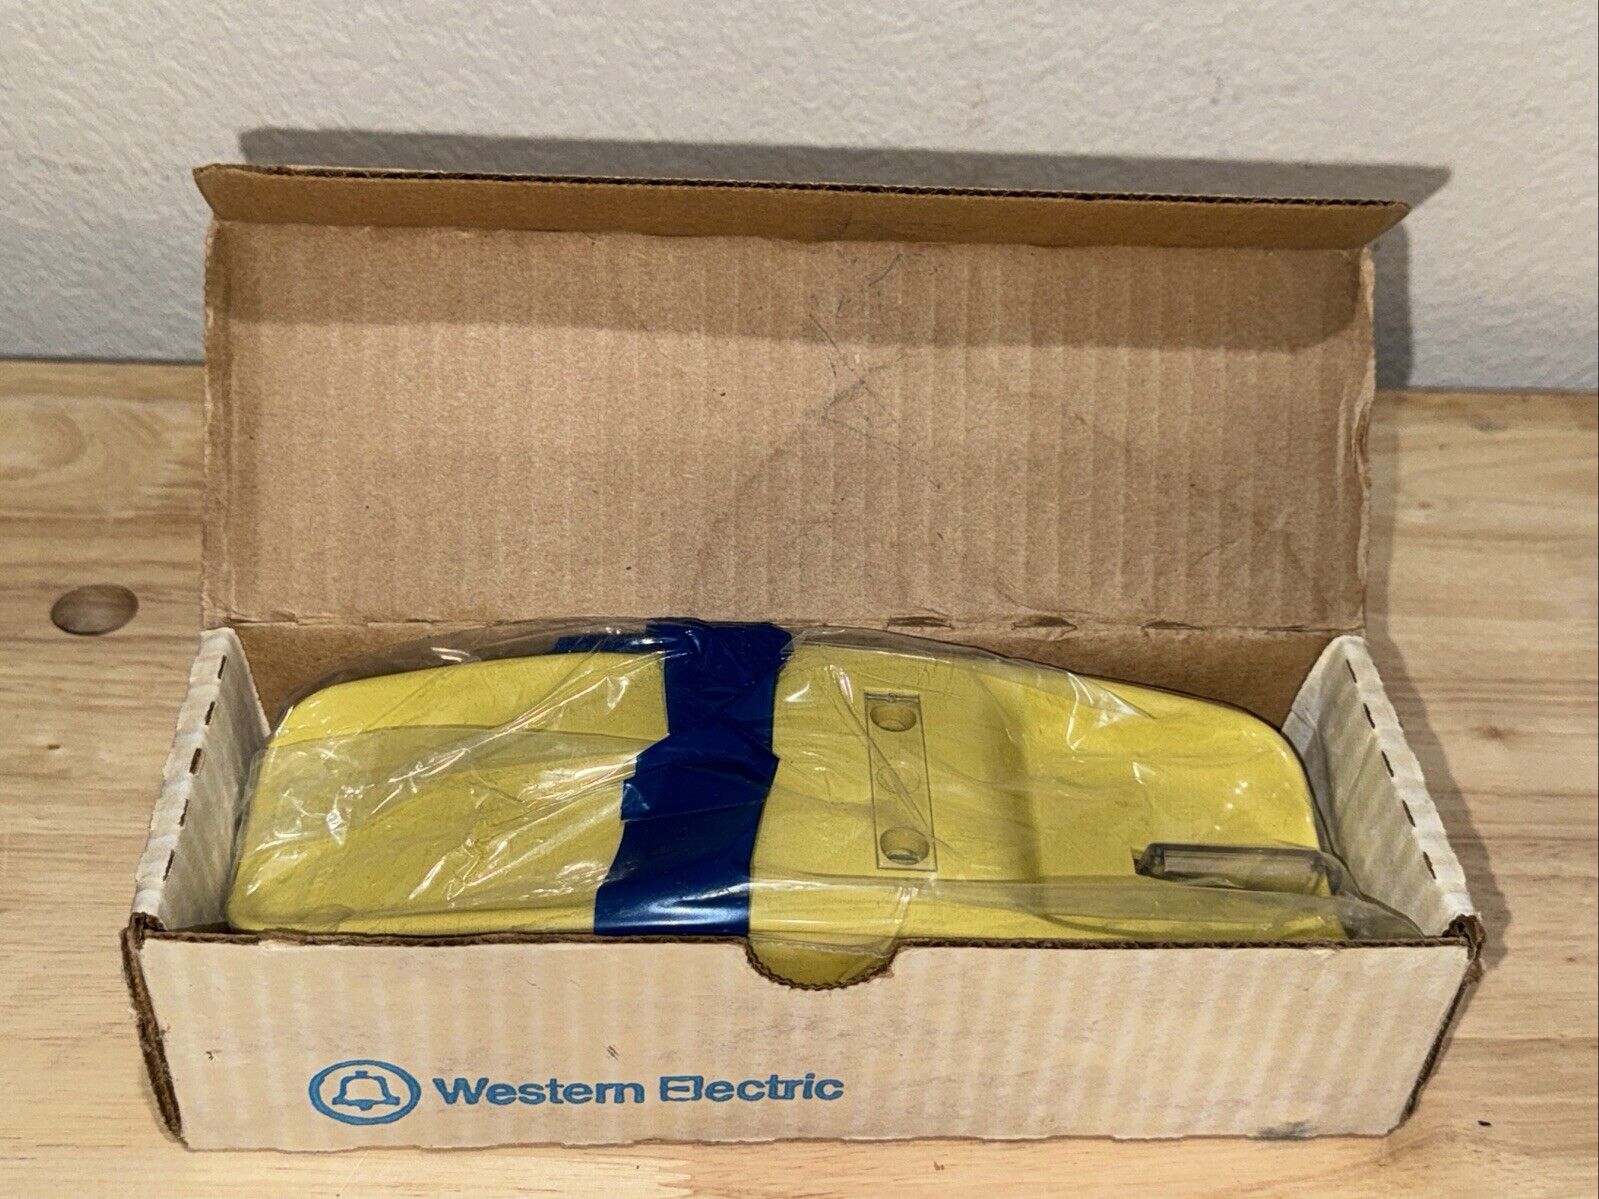 Western Electric NOS Yellow Trimline Push Button Telephone Base Only